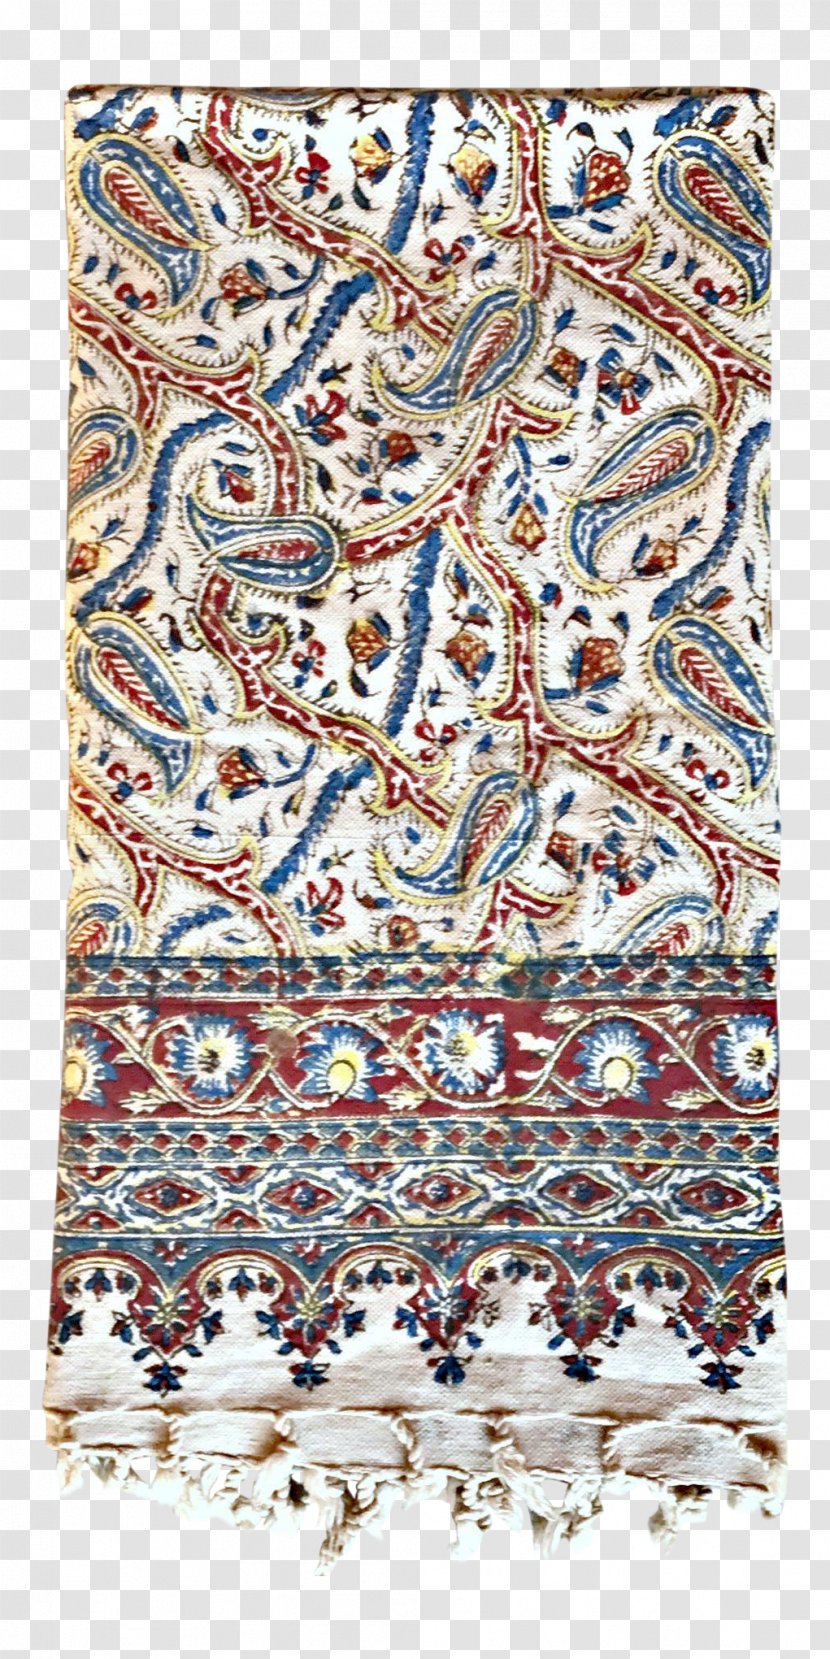 Textile Chairish Islamic Rugs Antique Art - Used Good - Paisley Transparent PNG